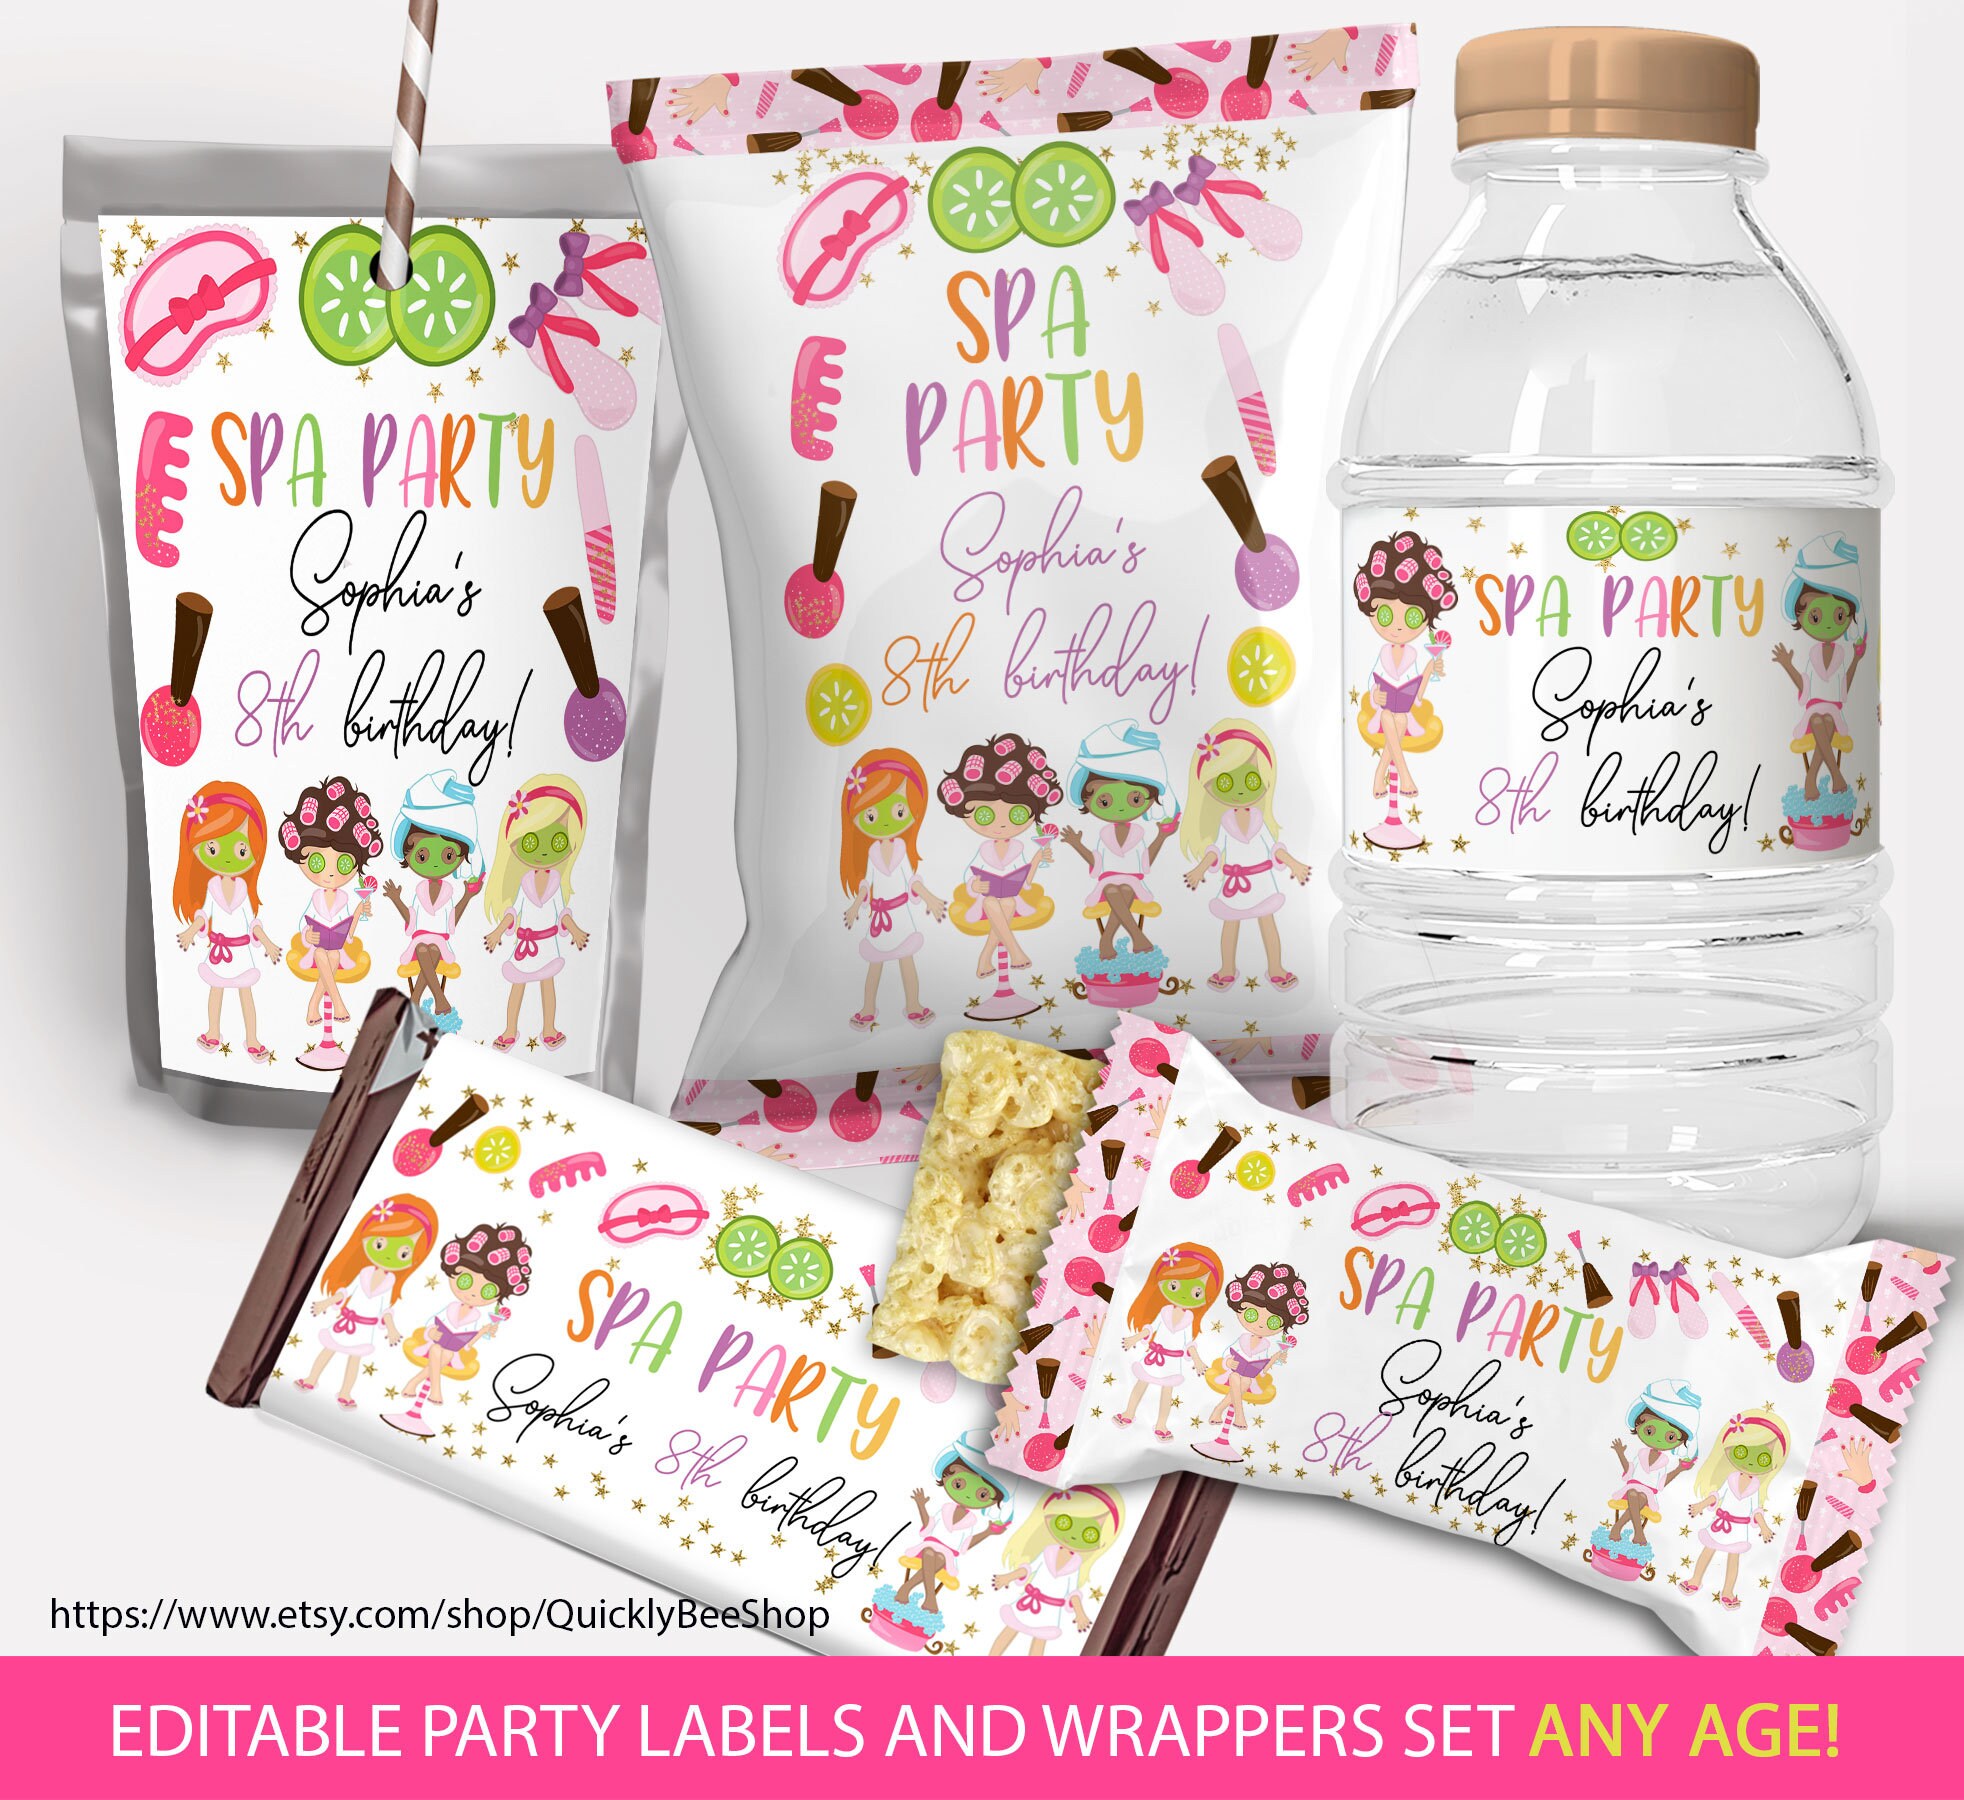 Older Girls, Ladies, Teens, Hen Party, Pamper Party Boxes Choose Your Own  Contents Birthday Party Favours, Sleepovers, Spa Party Bags 